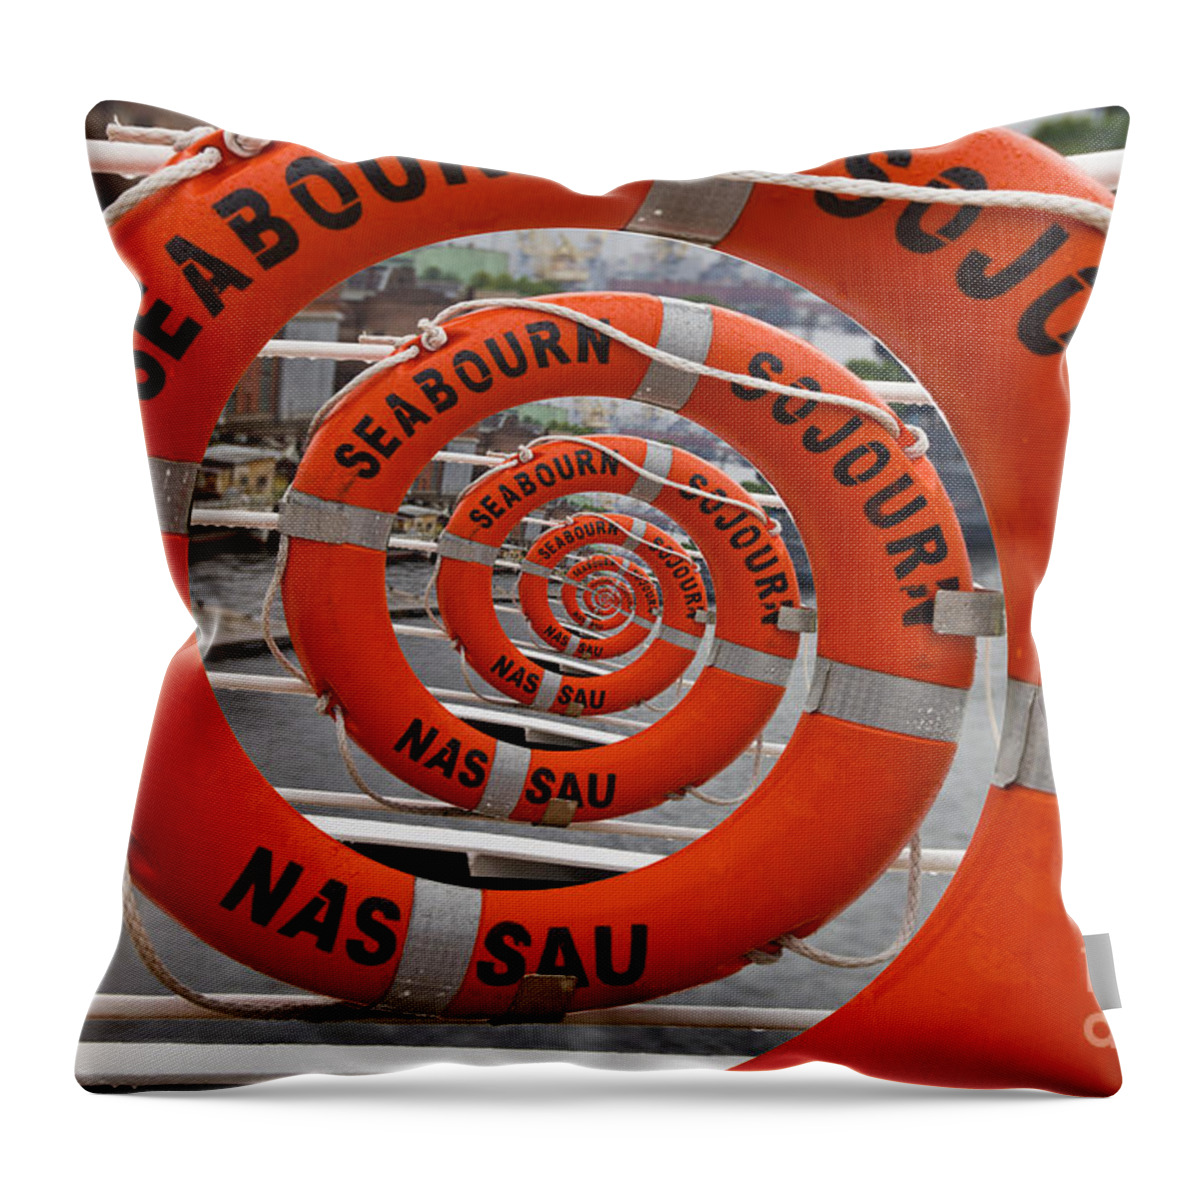 Clare Bambers Throw Pillow featuring the photograph Seabourn Sojourn Spiral. by Clare Bambers